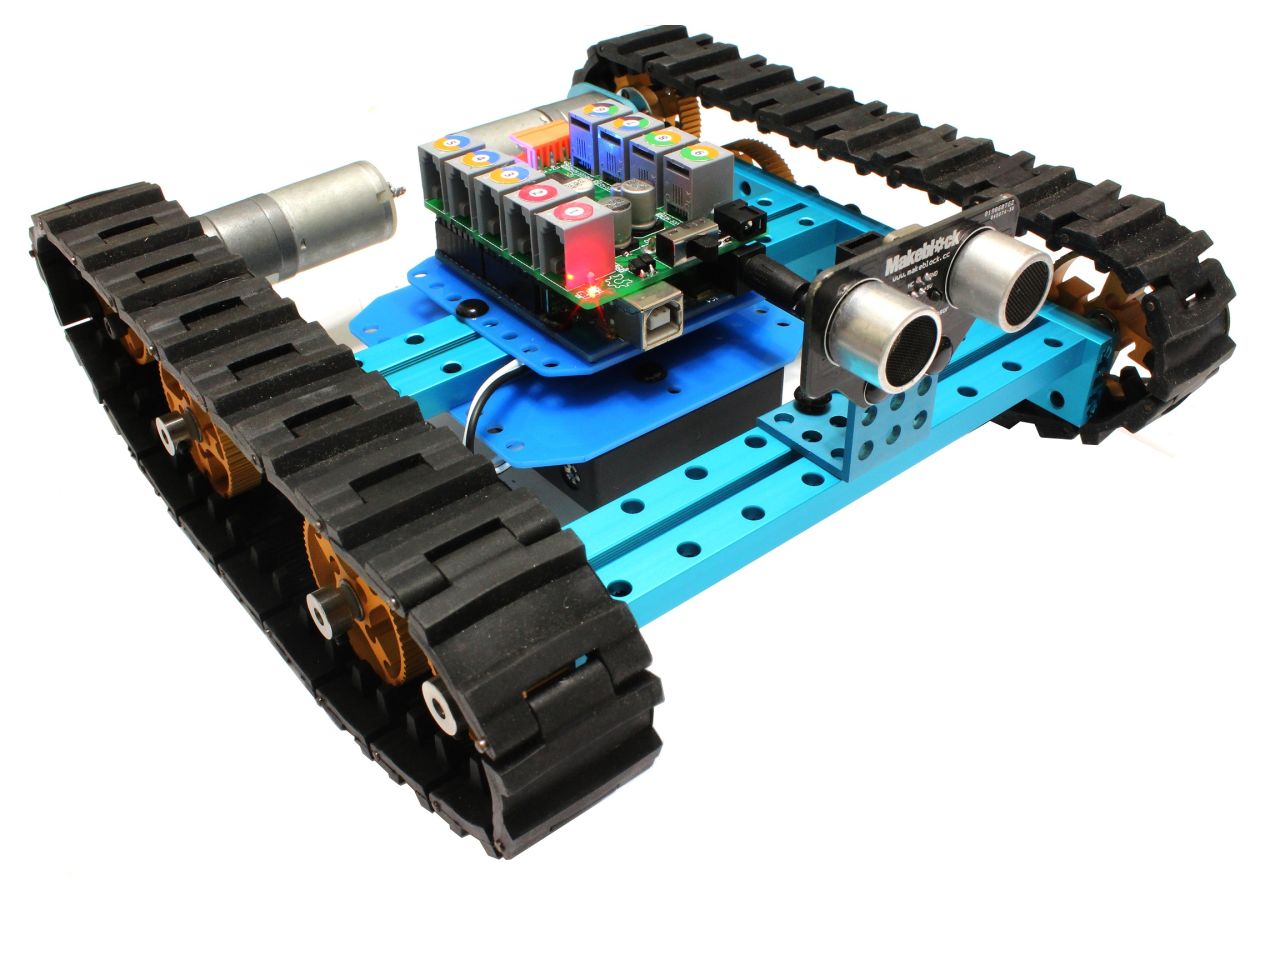 As well as mechanical components, a range of sensors are available with Makeblock kits. In this photo, a robot with tracks has a proximity sensor fixed to the front, so it won't crash into walls.